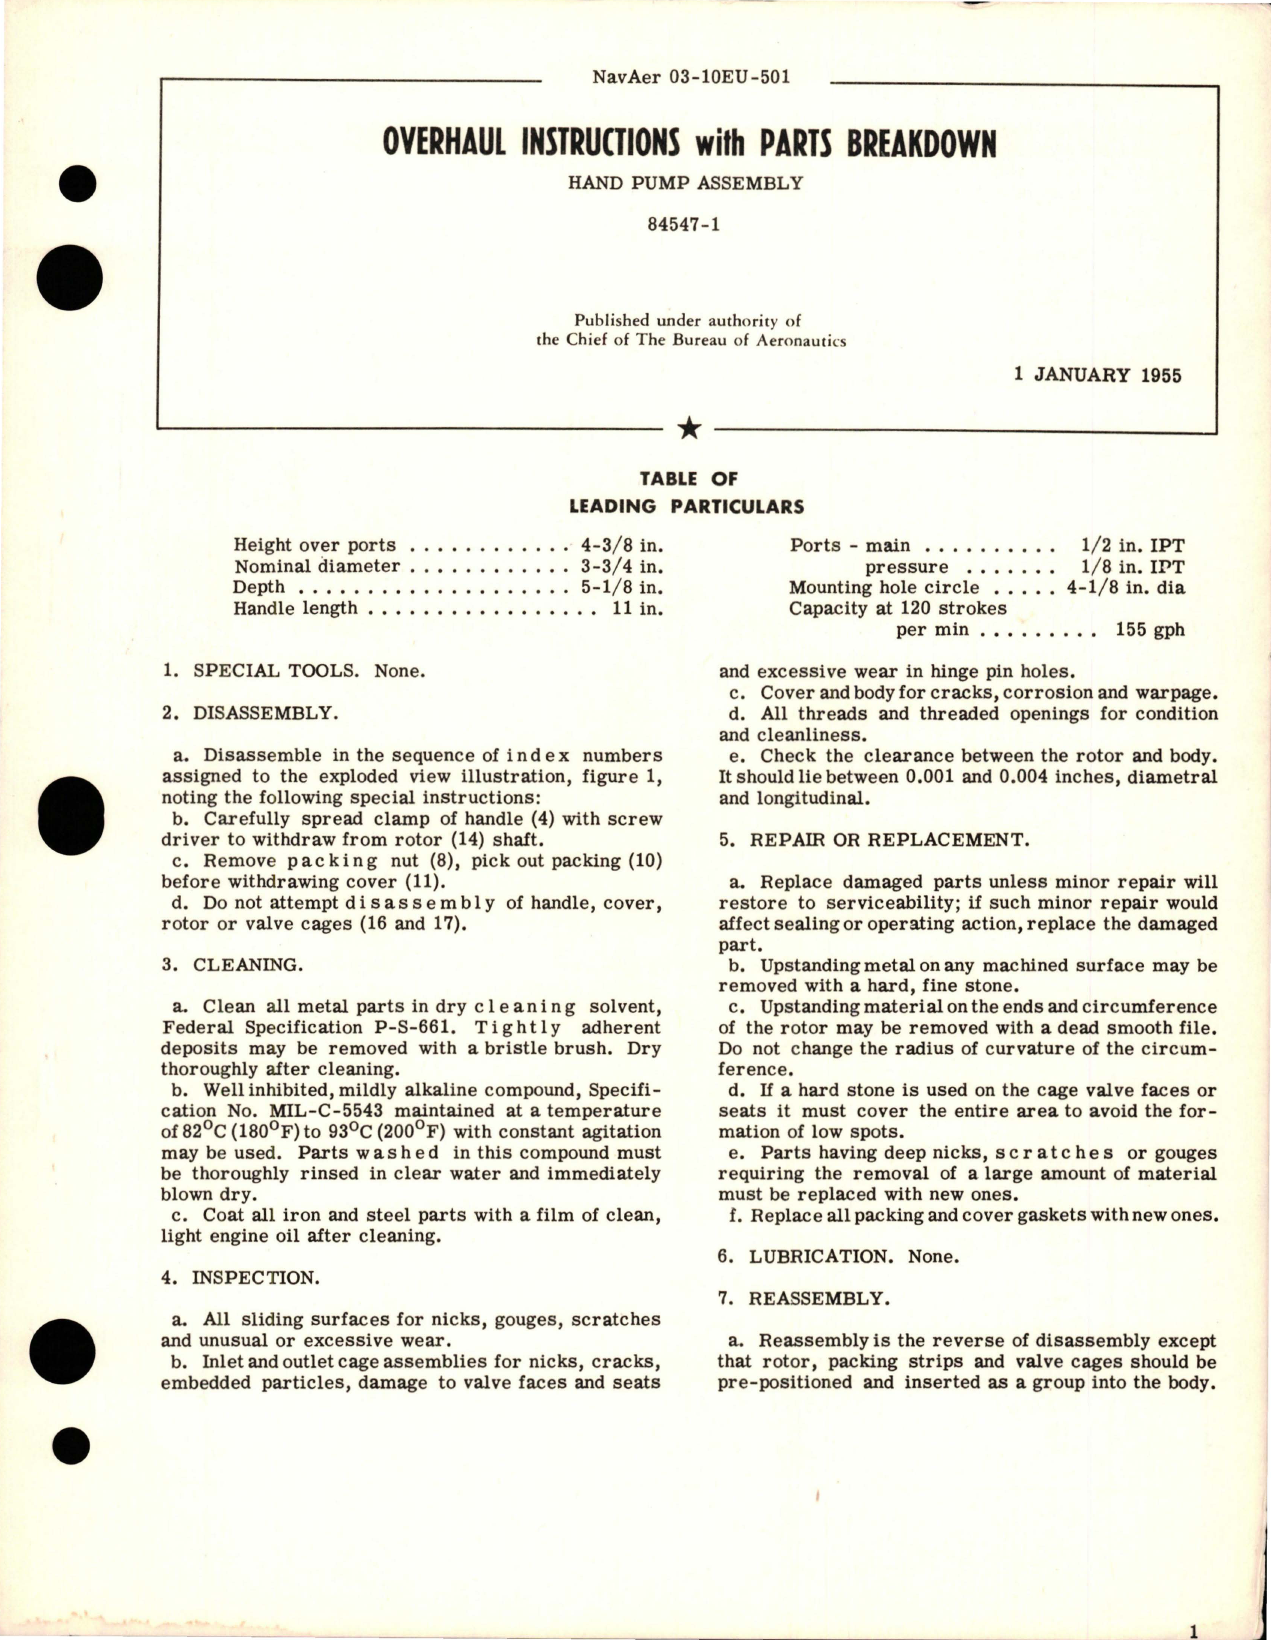 Sample page 1 from AirCorps Library document: Overhaul Instructions with Parts Breakdown for Hand Pump Assembly - 84547-1